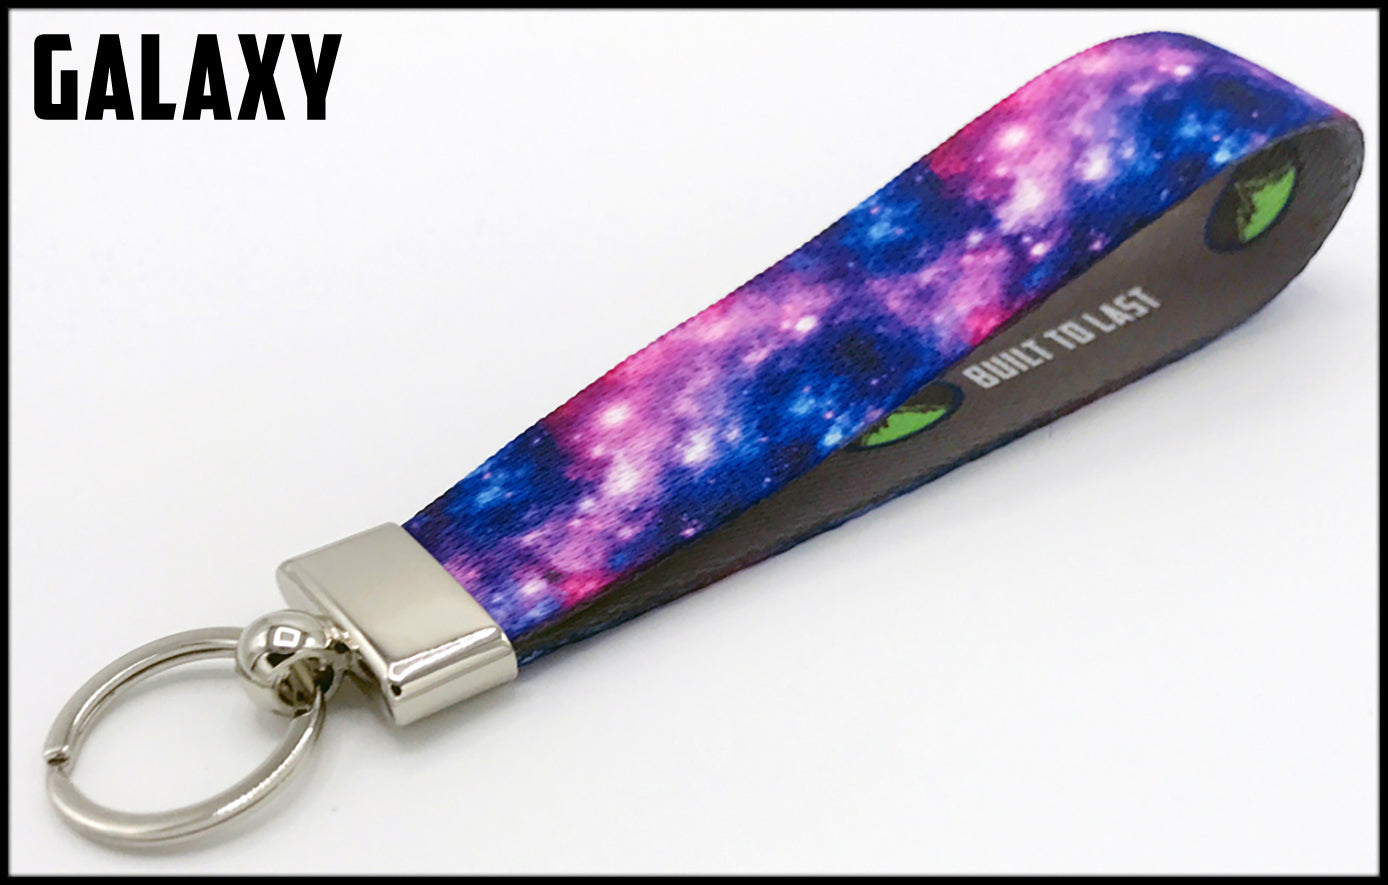 Space galaxy. 1 inch custom picture quality polyester webbing keyfob. Design by Northwest Straps.